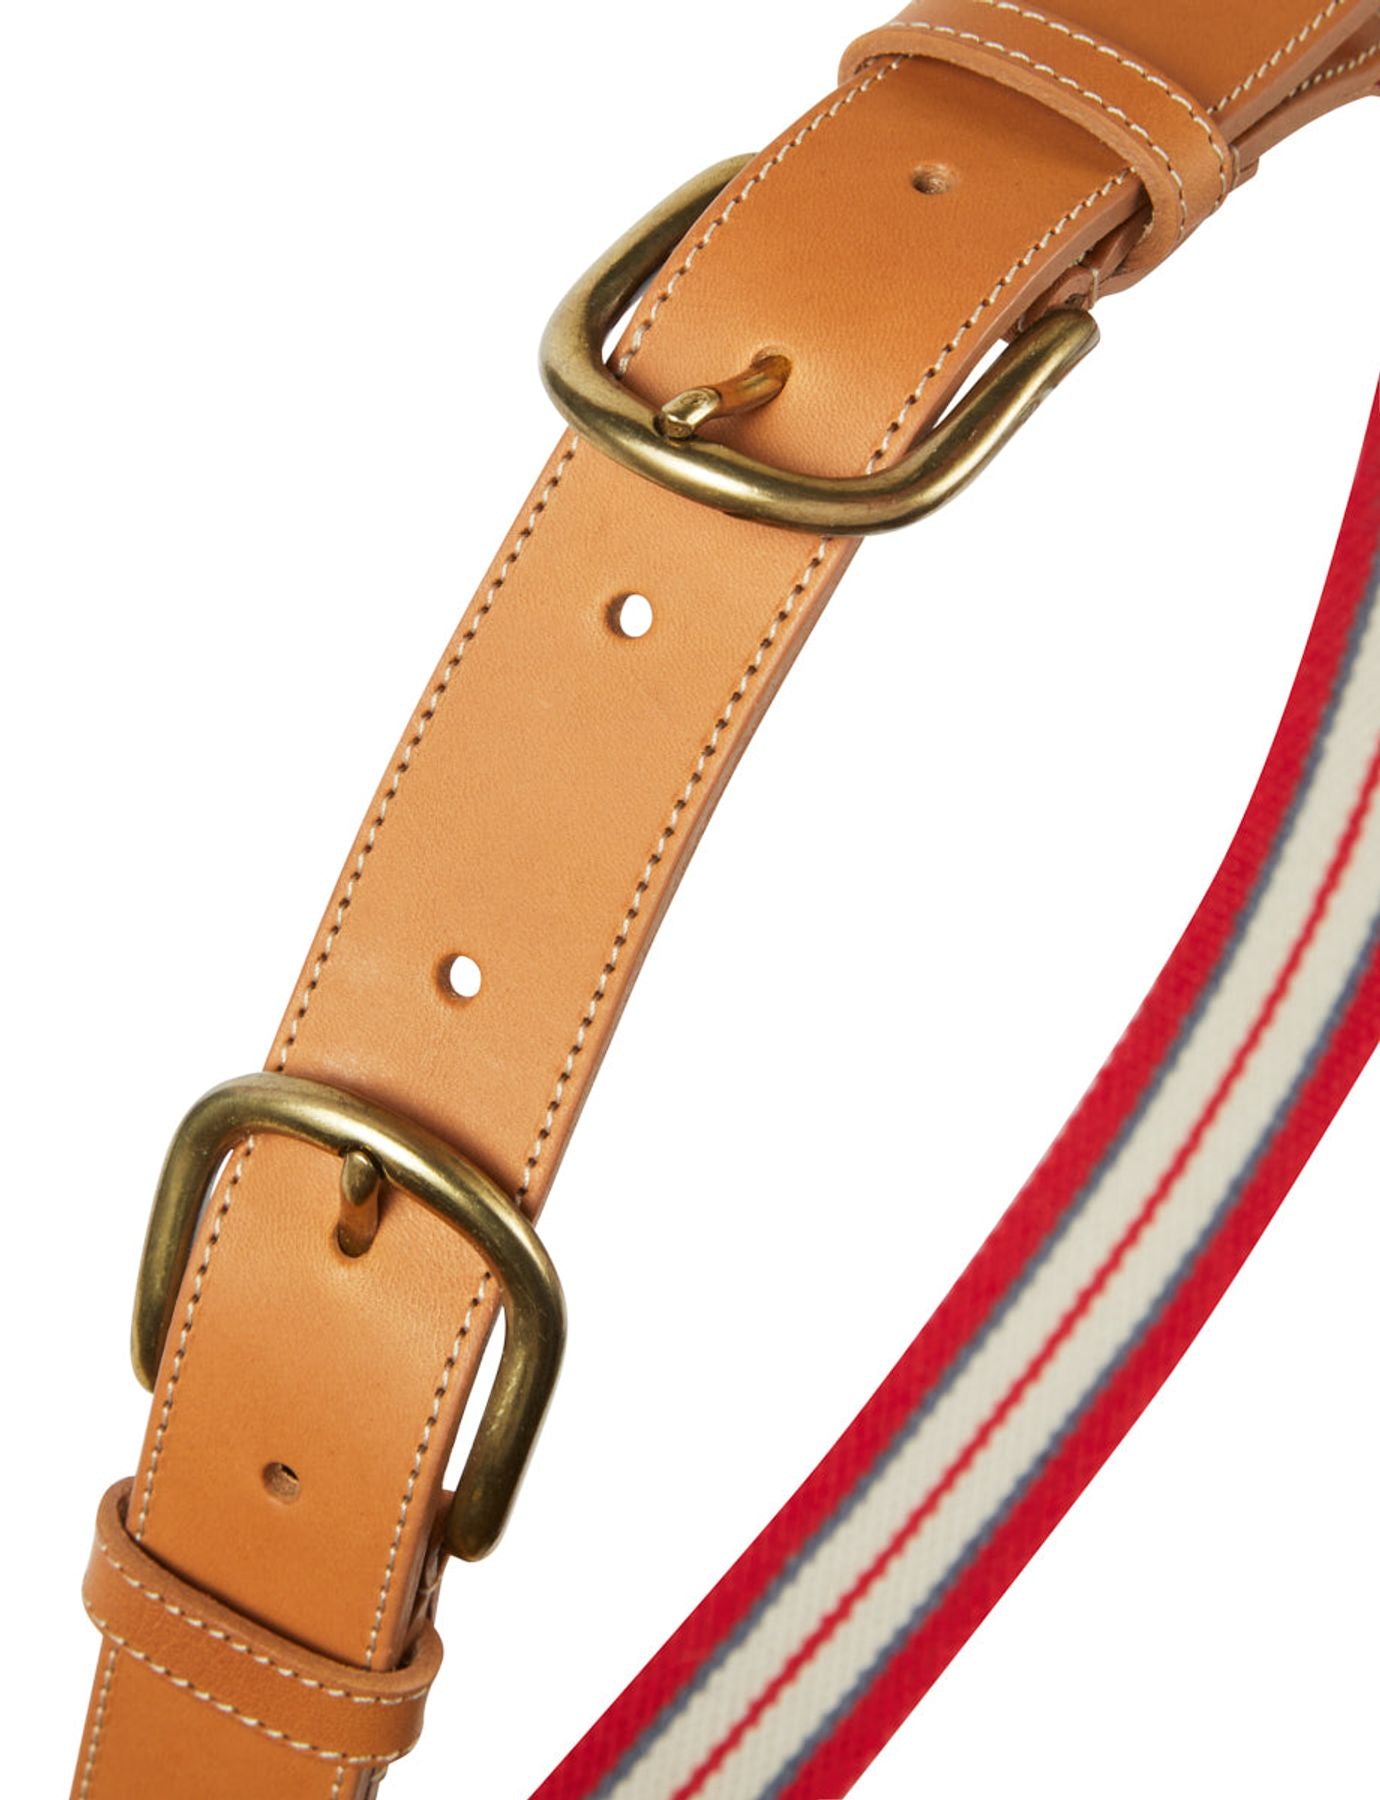 belt-adeline-red-and-white